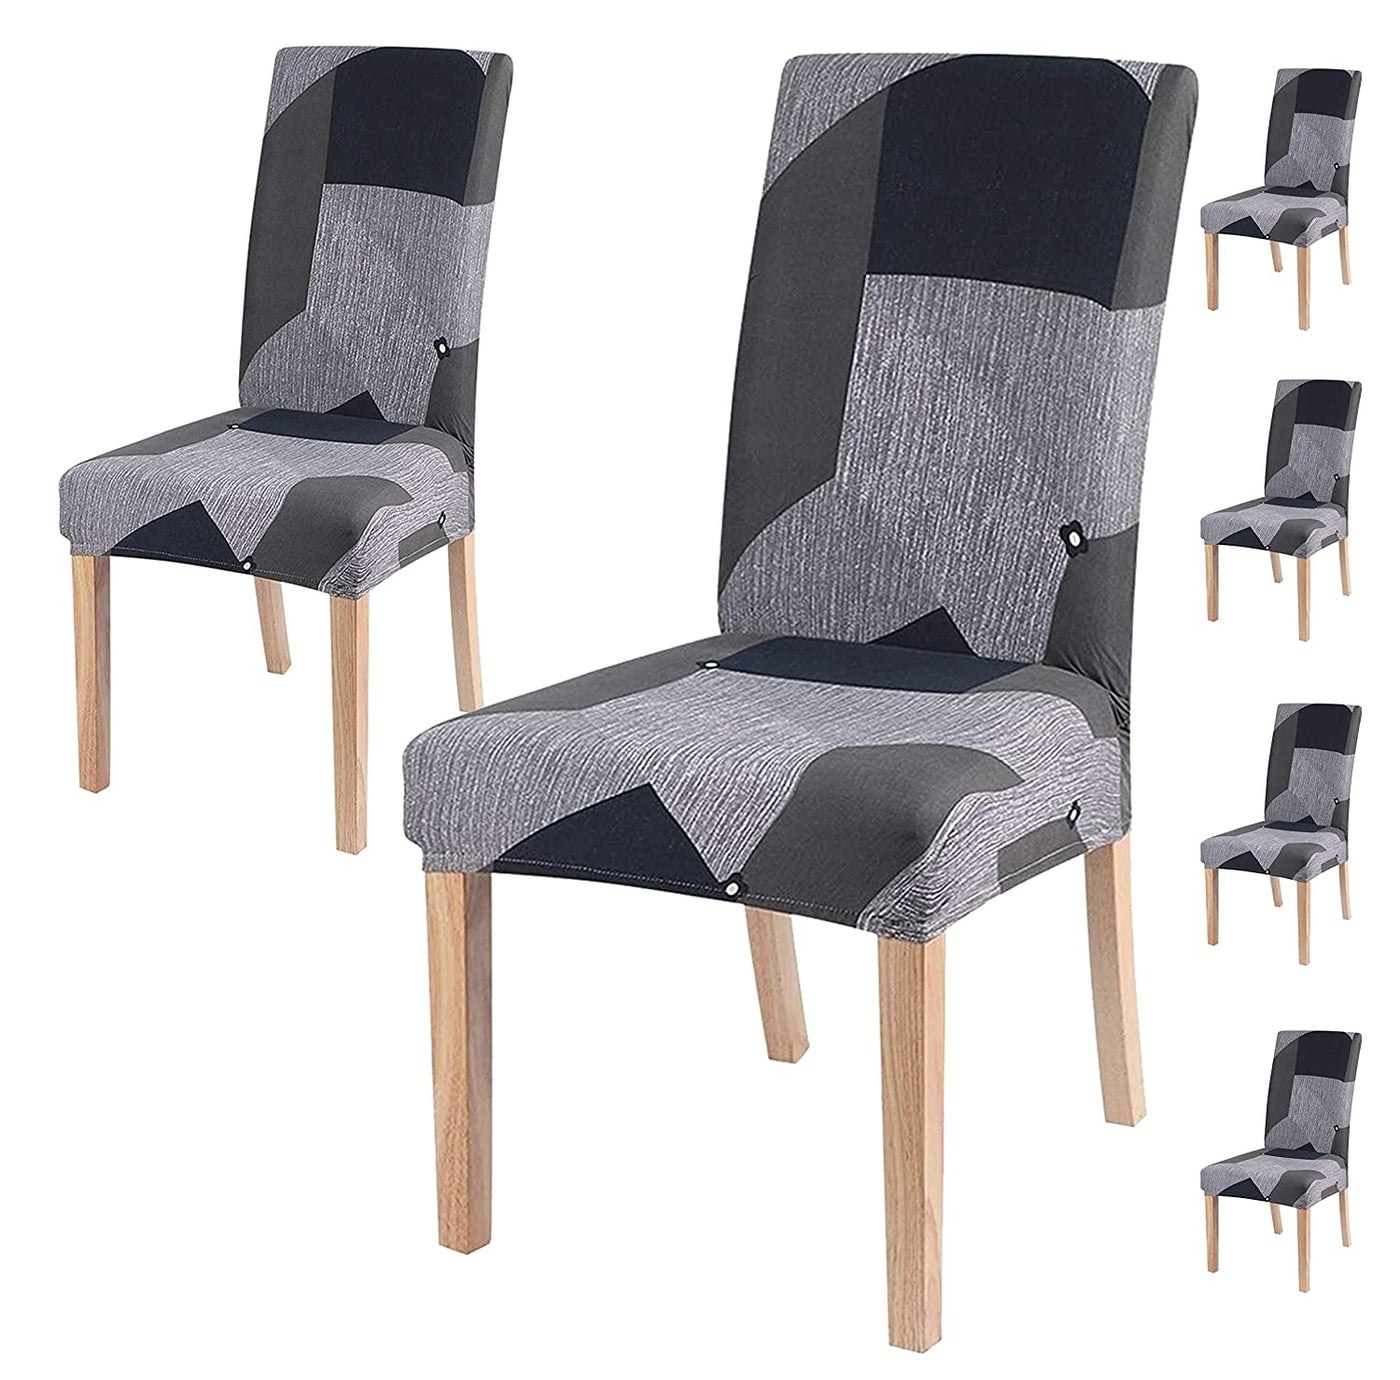 Elastic Chair Cover(Grey Prism)